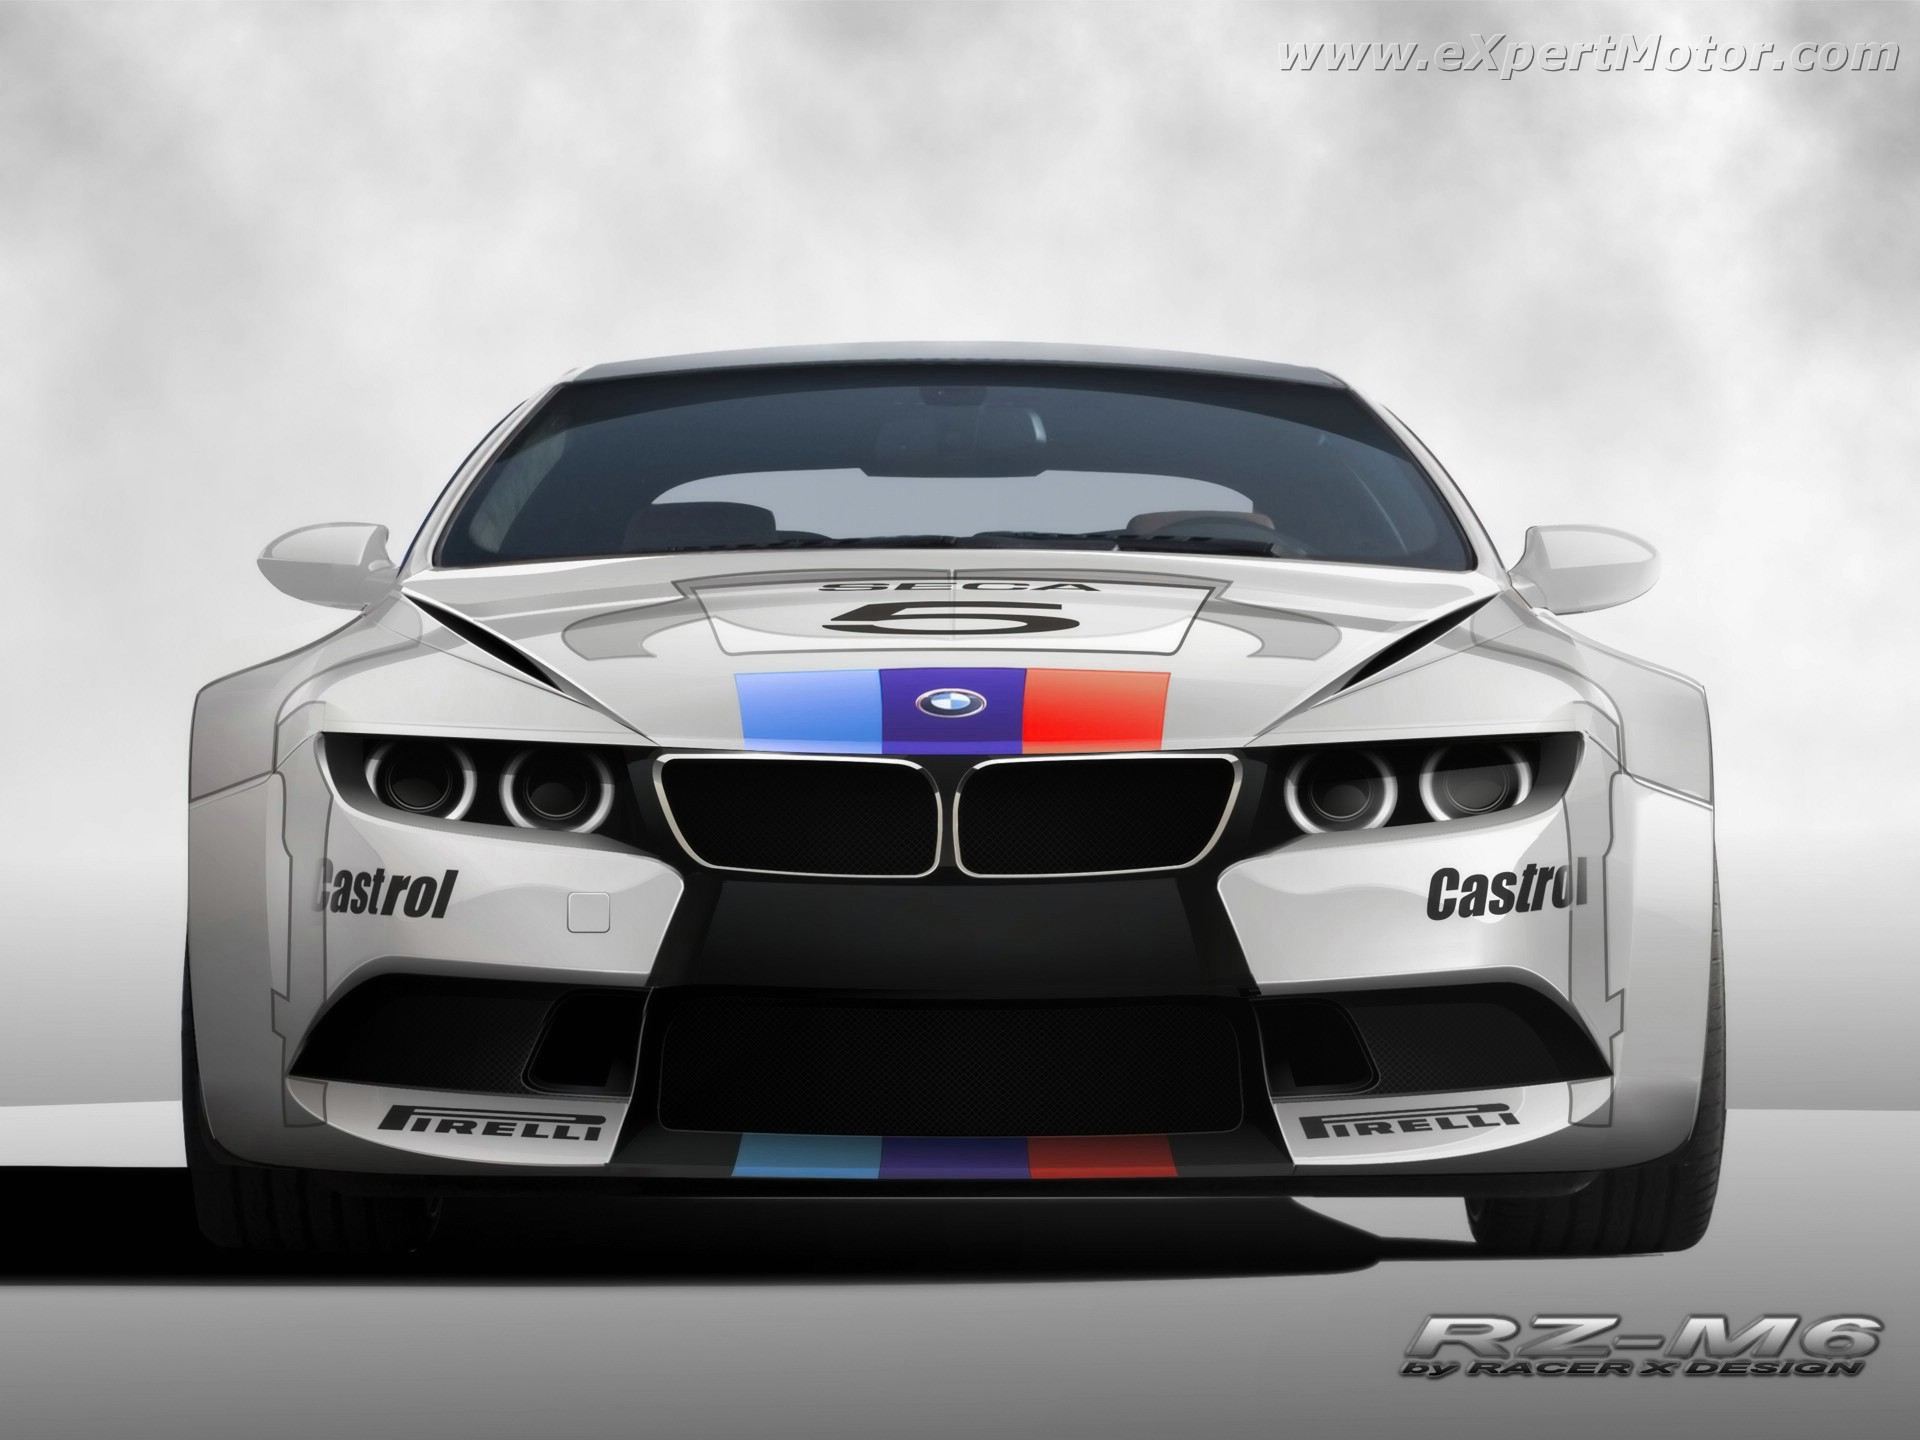  2012 on Bmw 6 Series E24 Virtual Tuning Racer X Design Has Made A Great